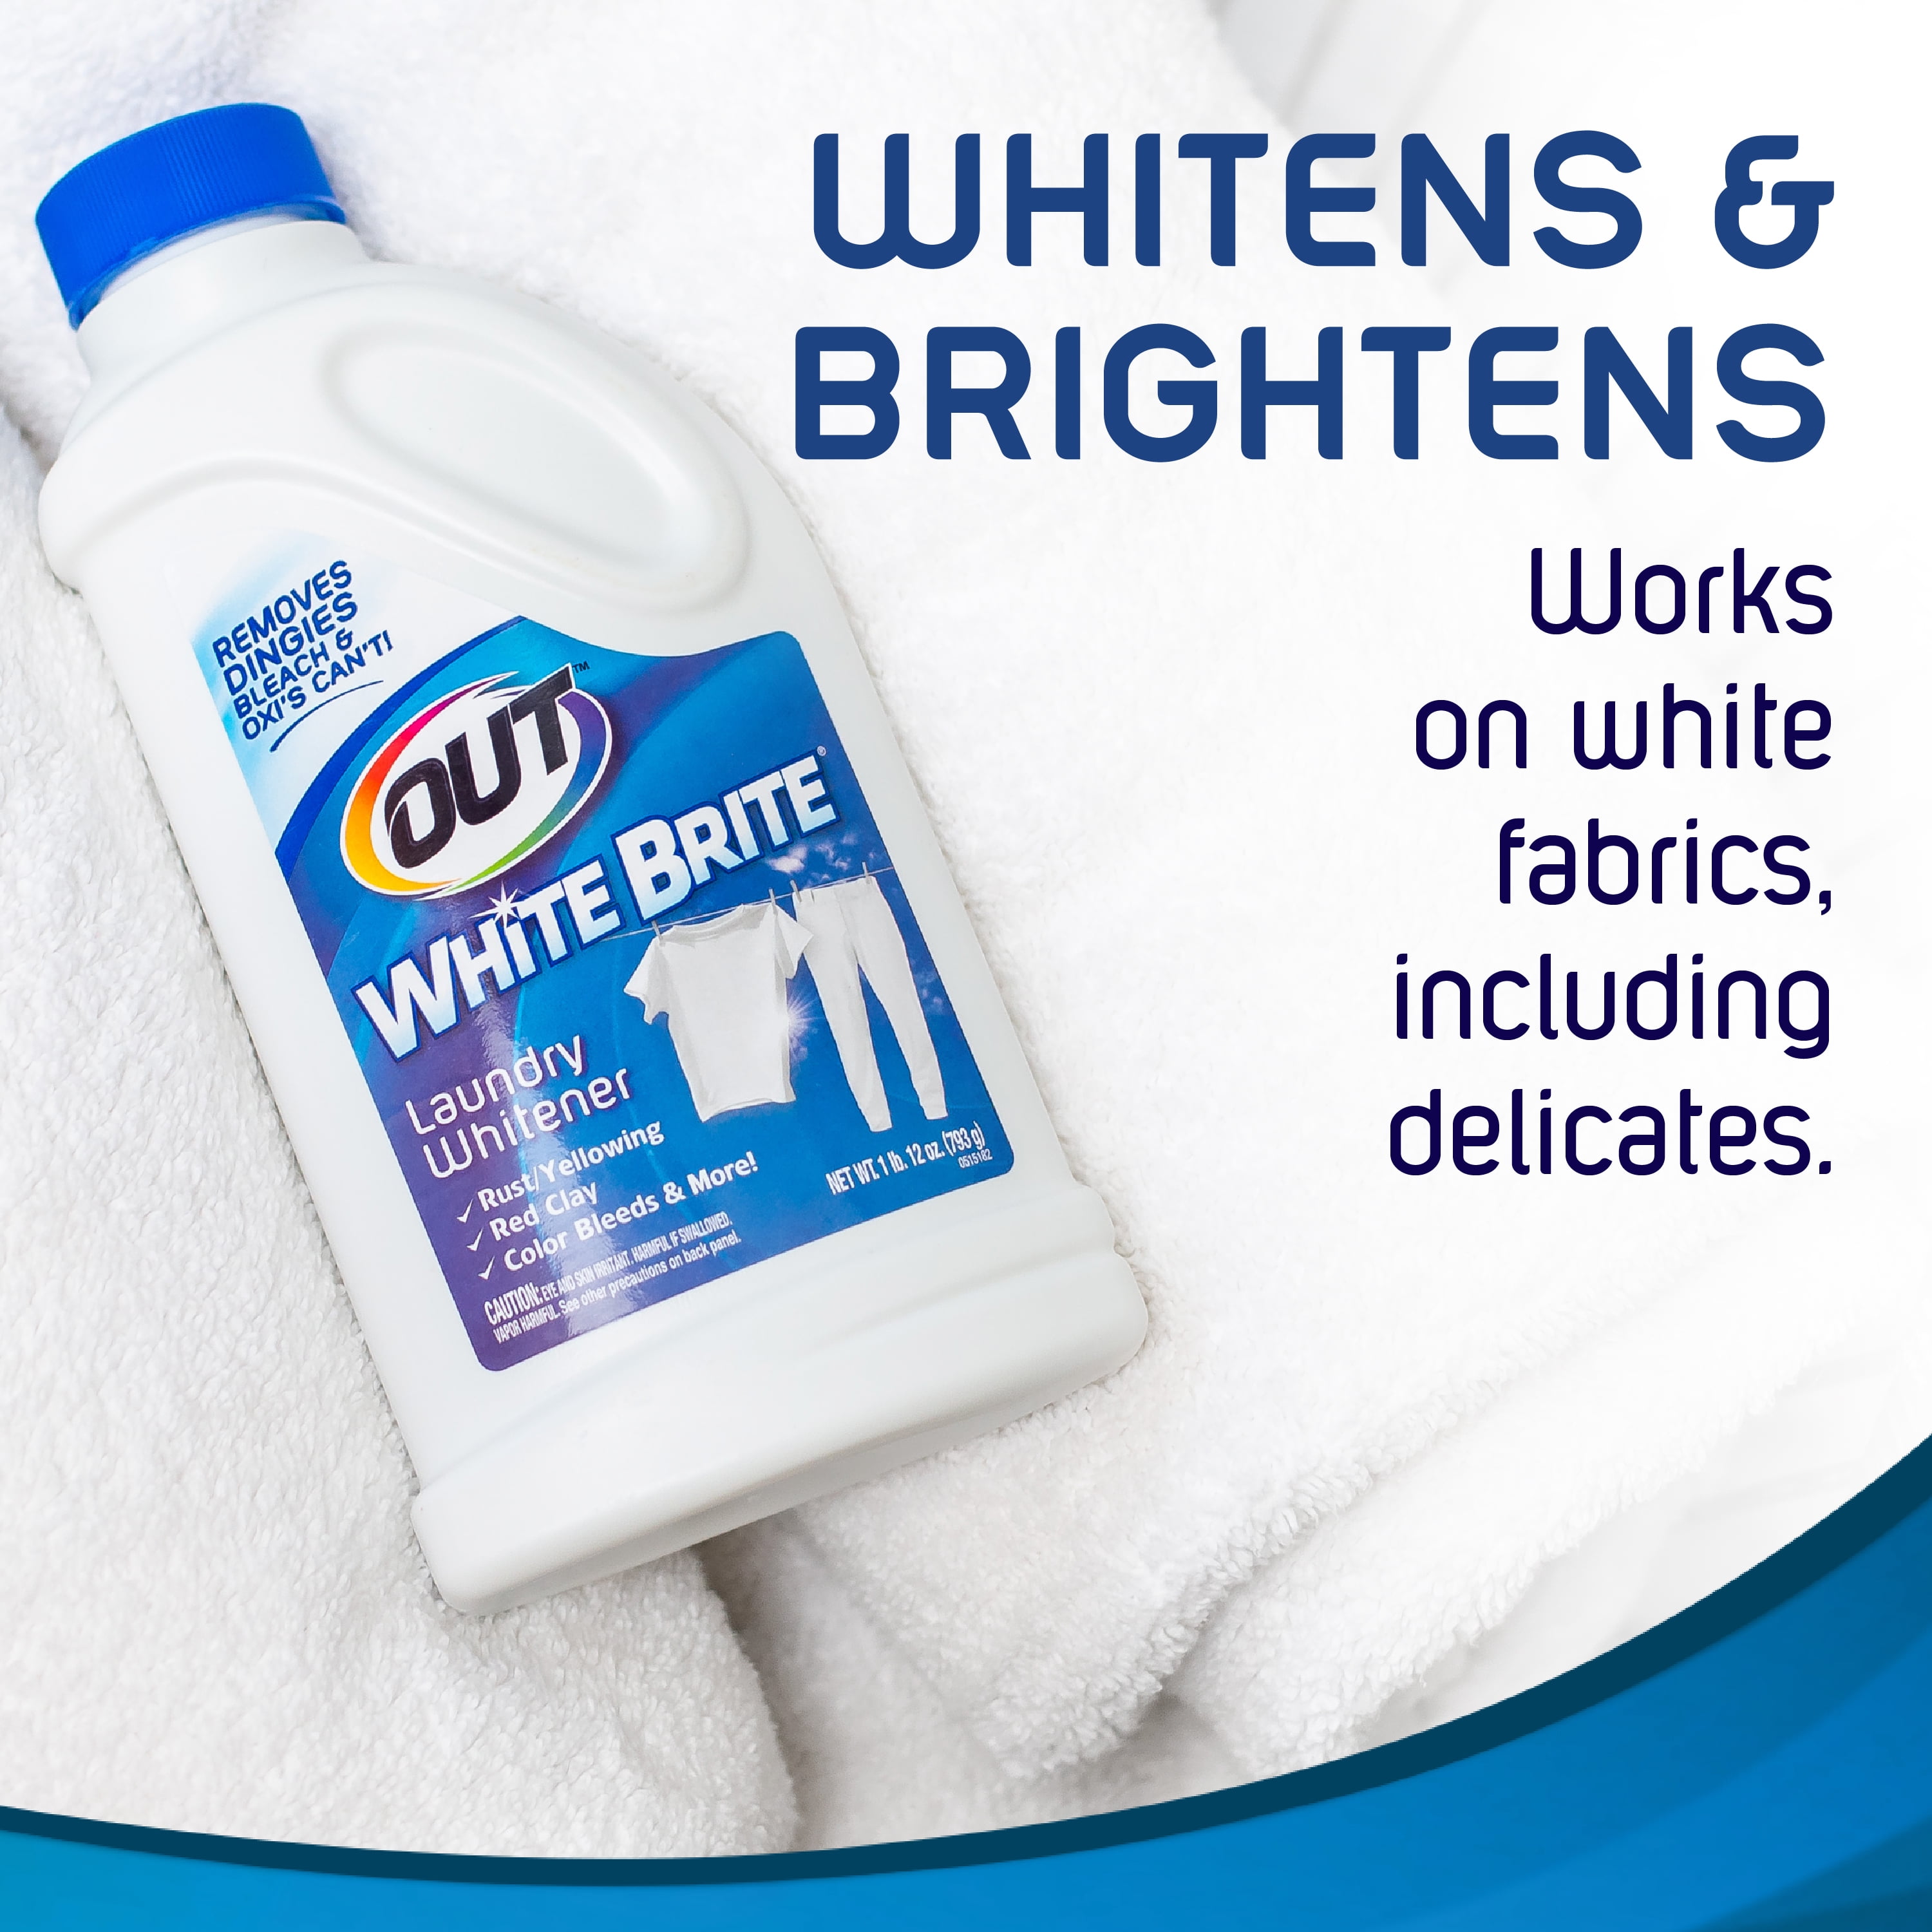 Out White Brite Laundry Whitener, 28 Ounces 